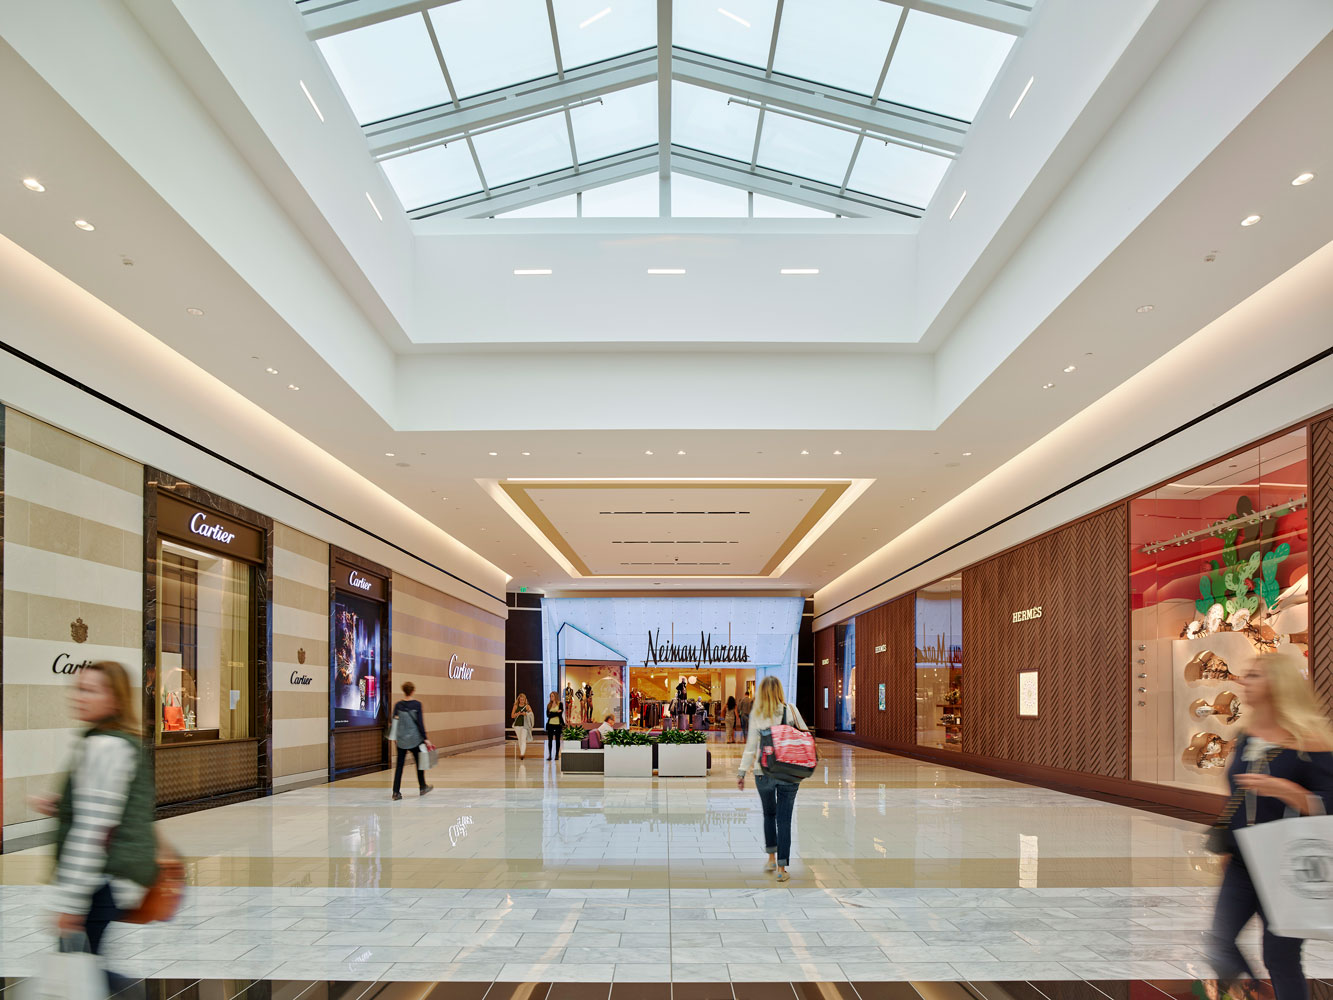 About King of Prussia® - A Shopping Center in King of Prussia, PA